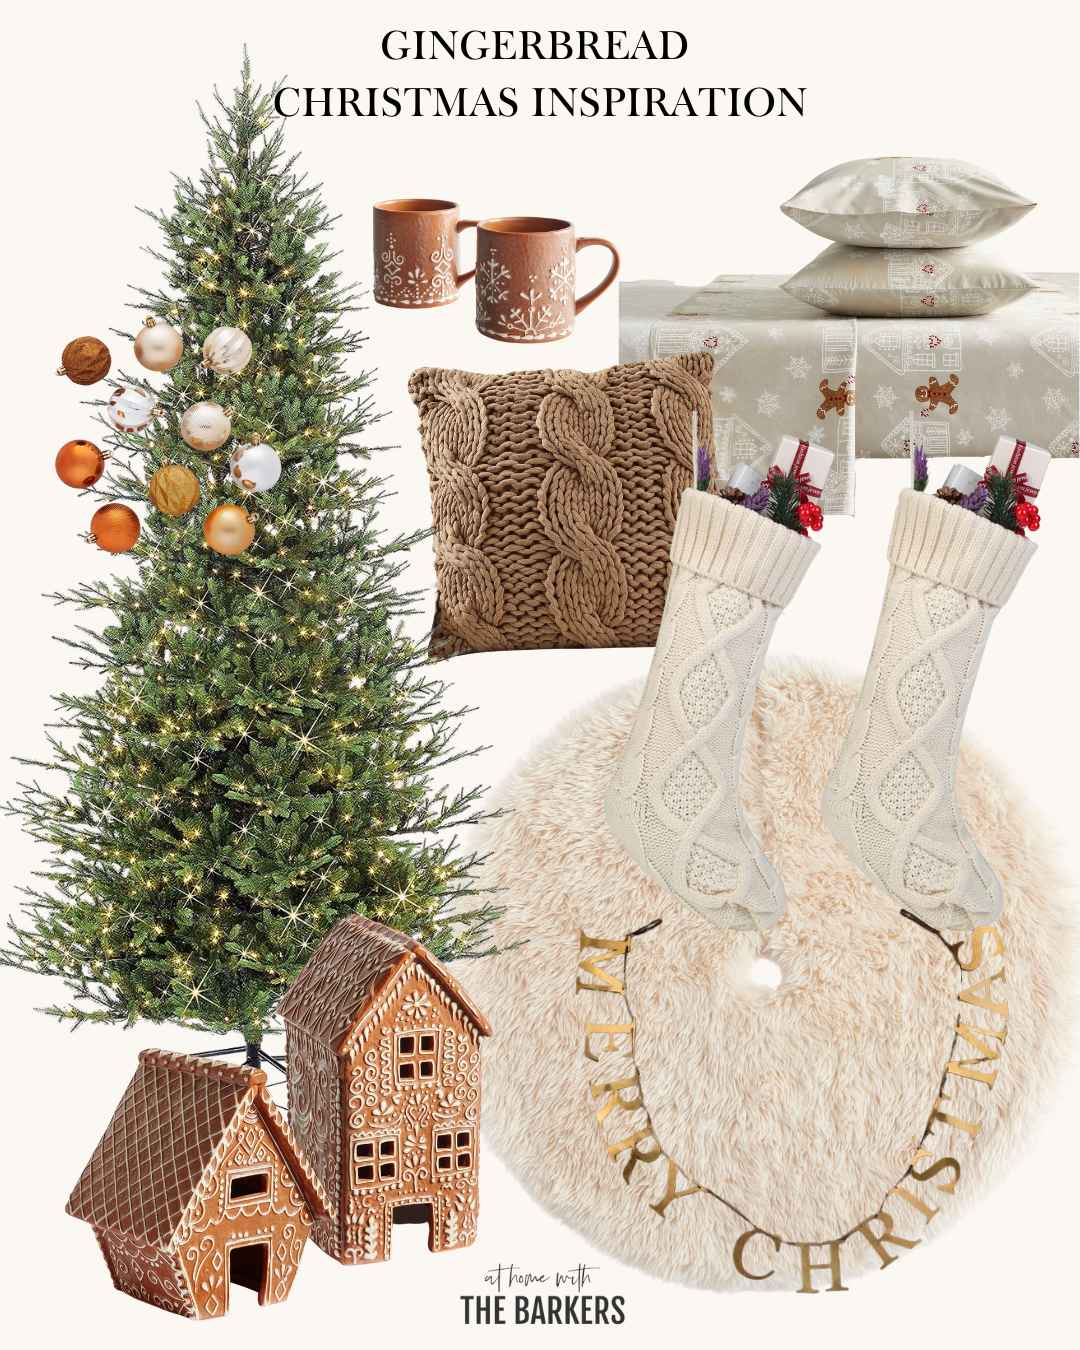 Gingerbread inspired Christmas Decor theme graphic